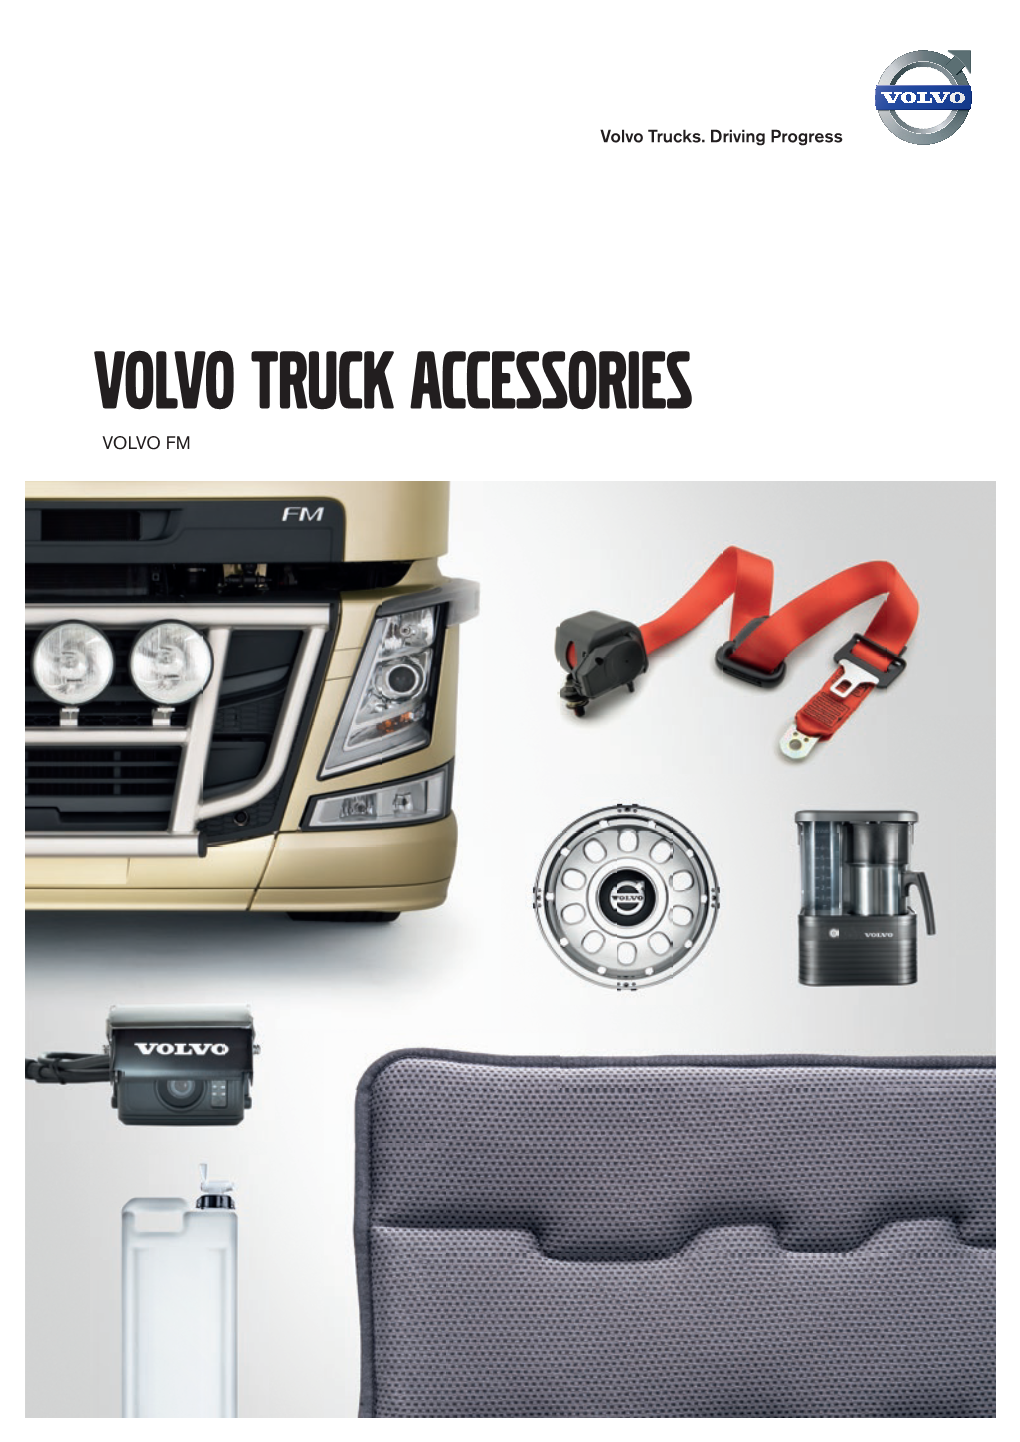 VOLVO FM How to Make Your Truck a Real Friend on the Road